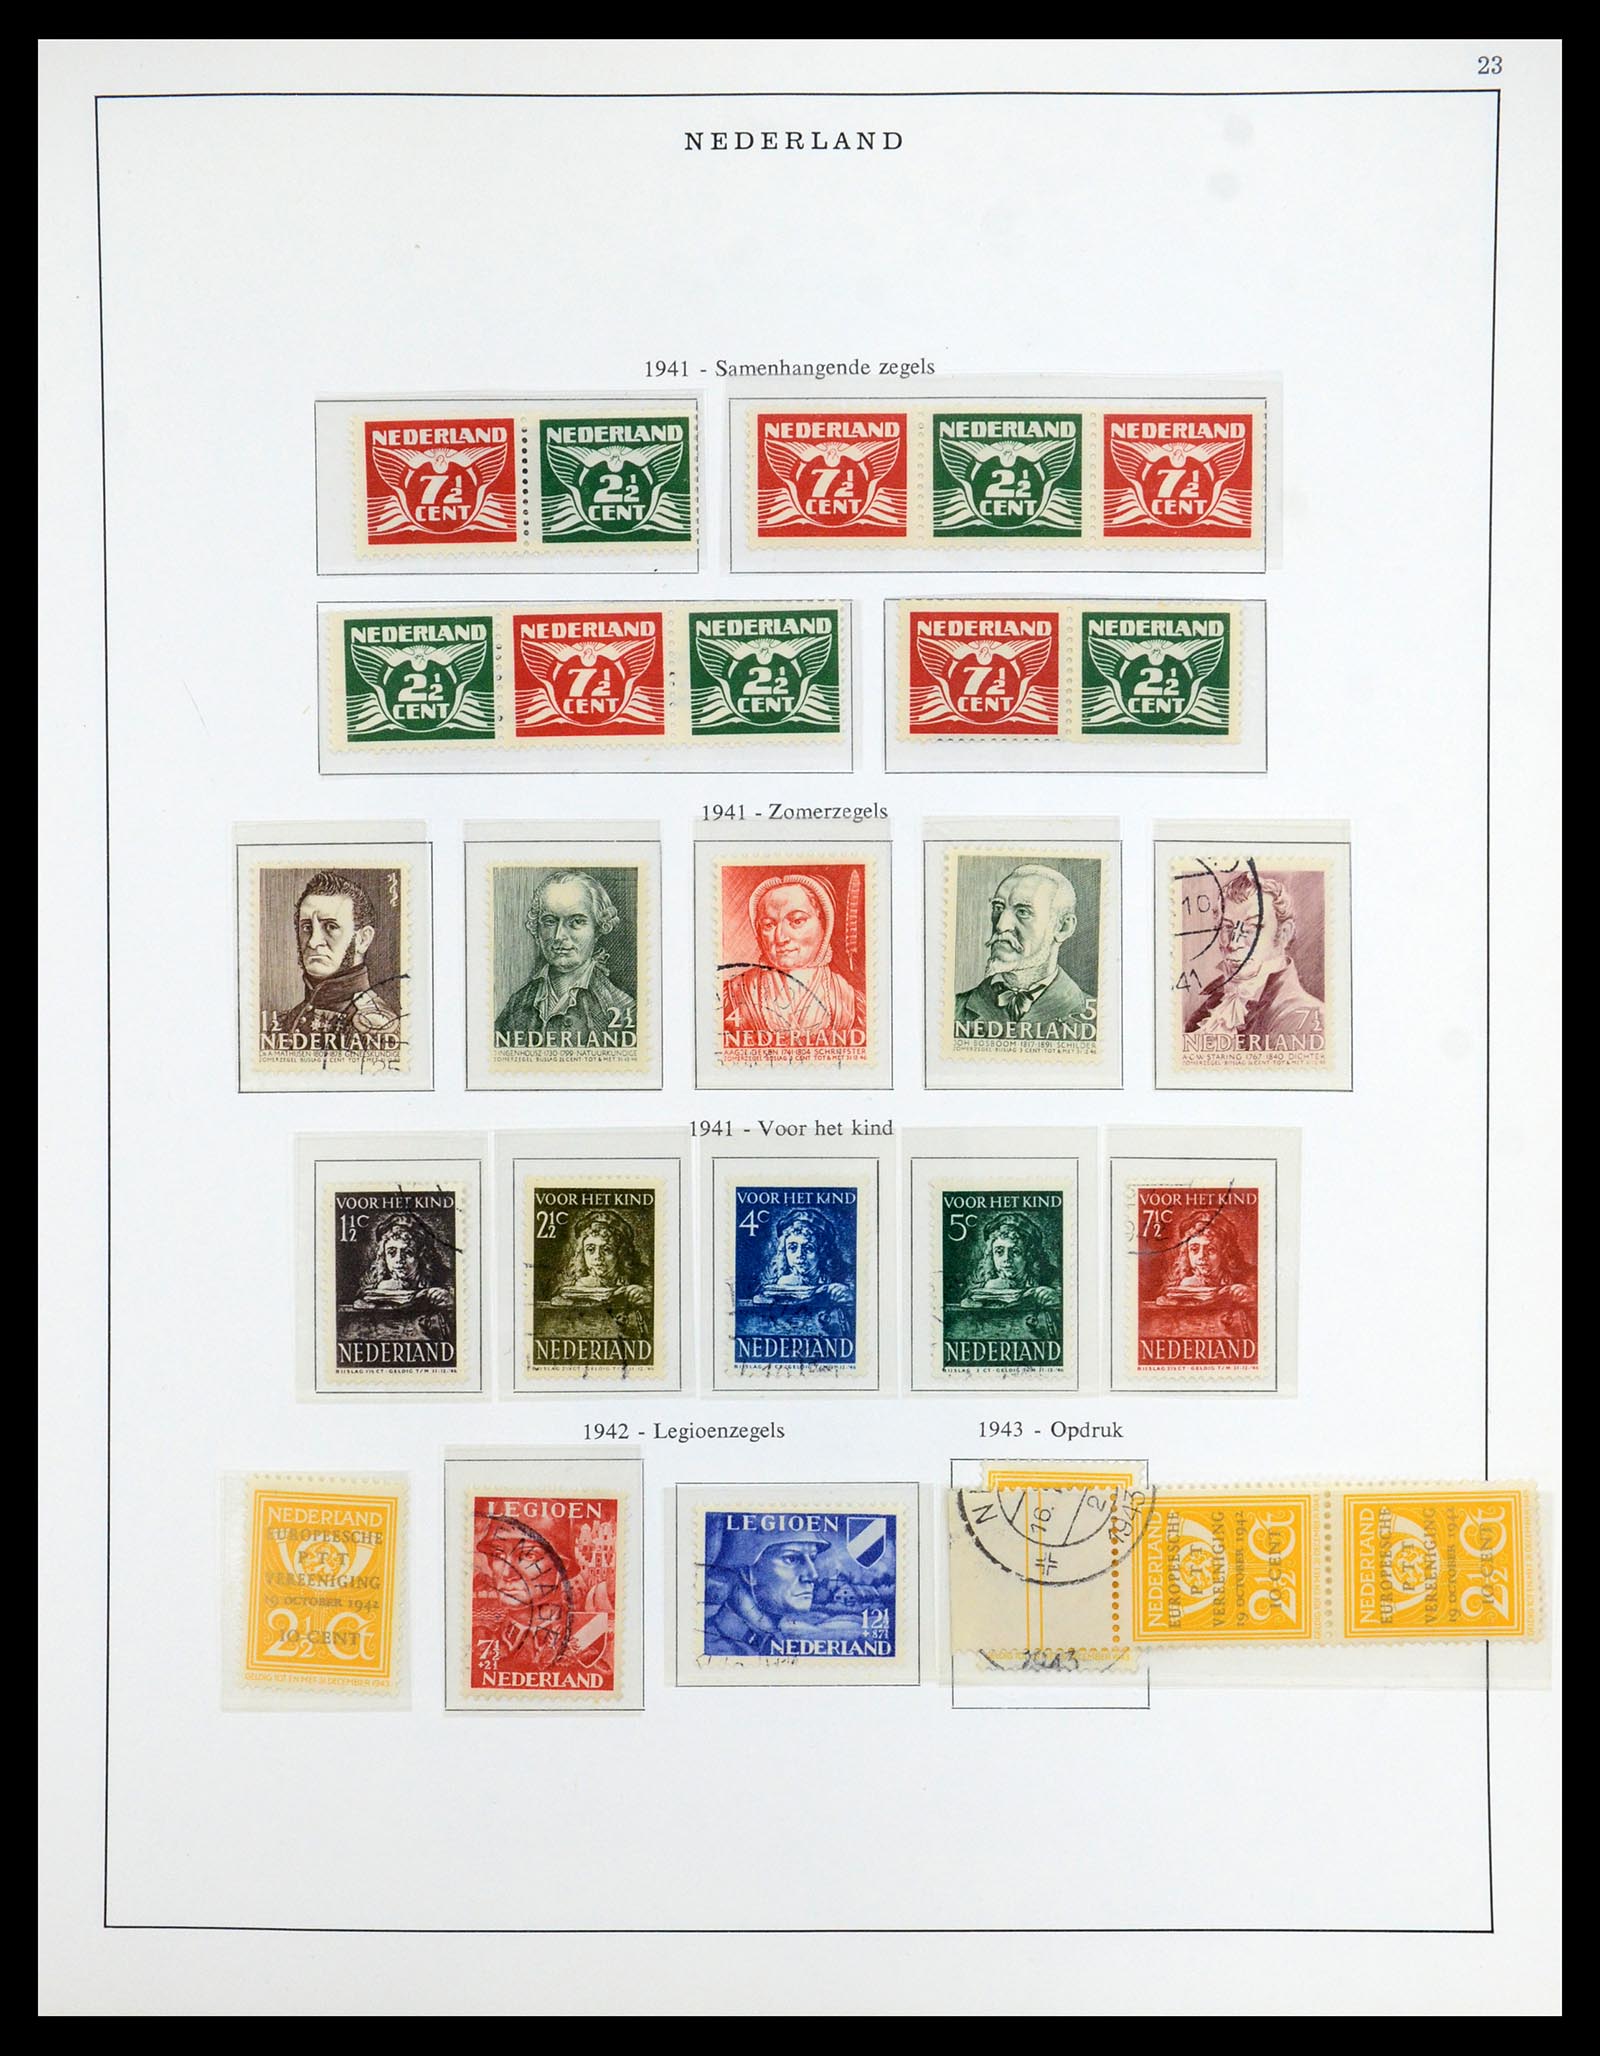 35938 023 - Stamp Collection 35938 Netherlands 1852-1975.